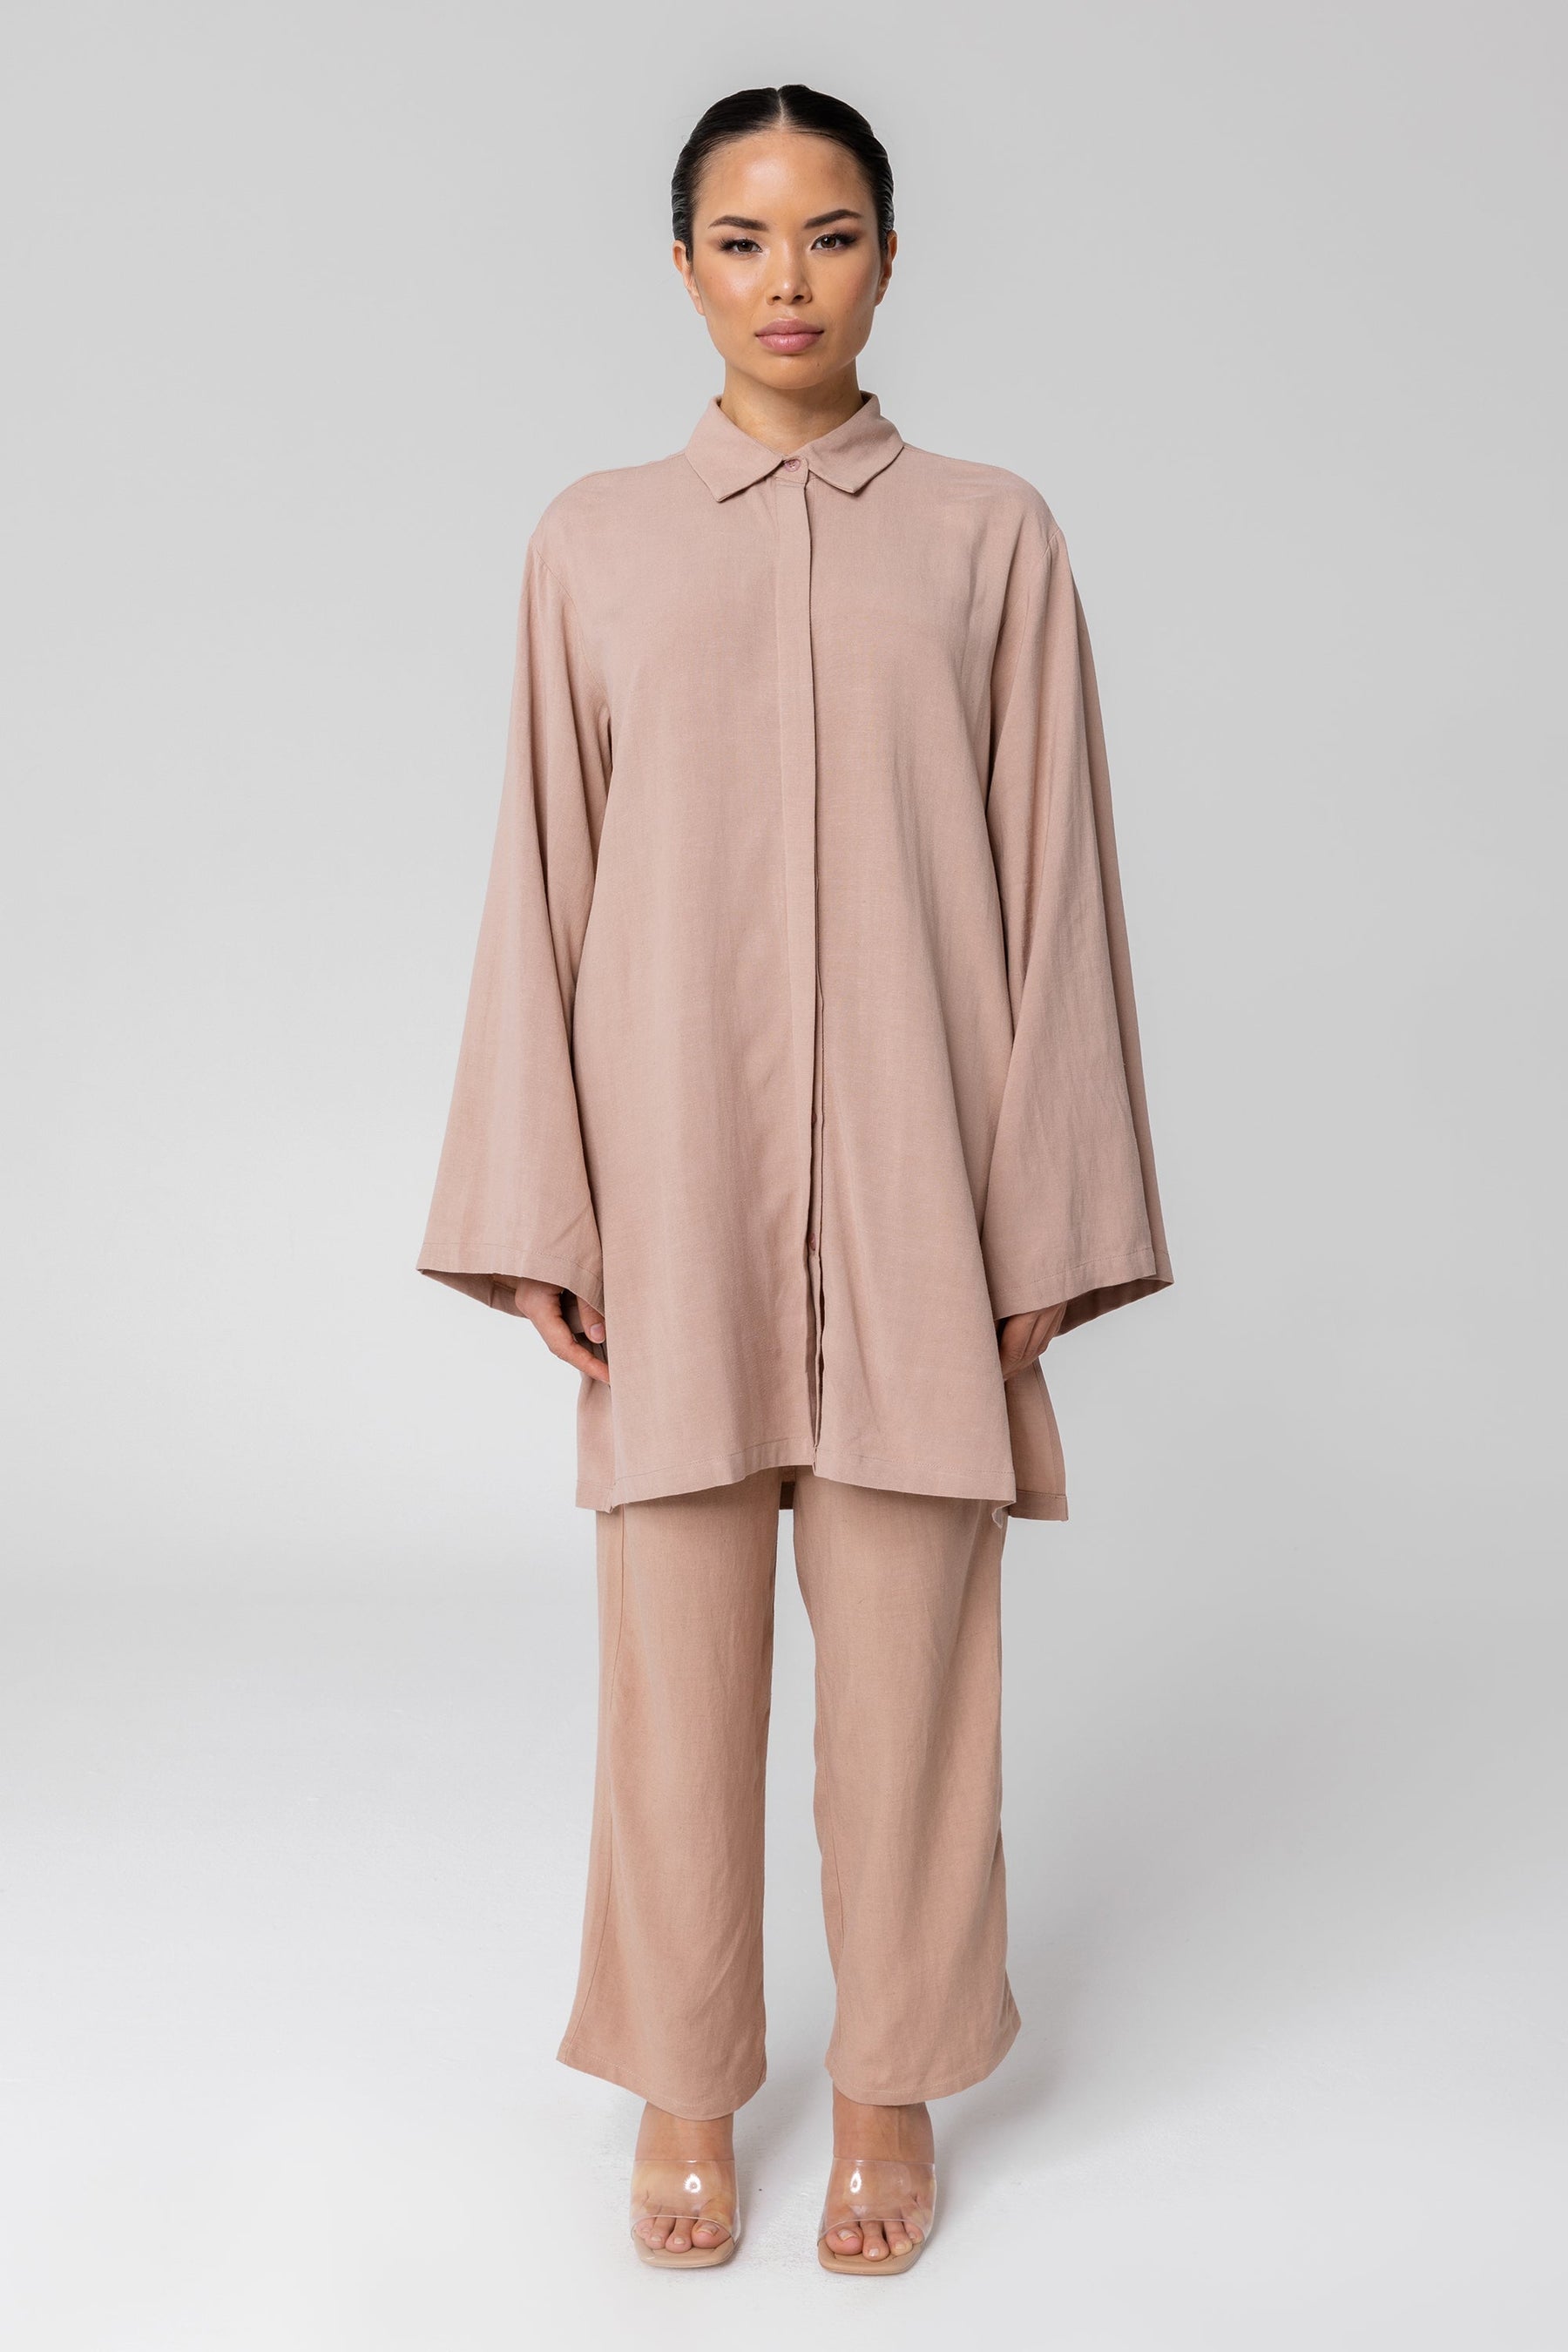 Gemma Linen Kimono Sleeve Button Down Top - Dusty Pink Veiled Collection 